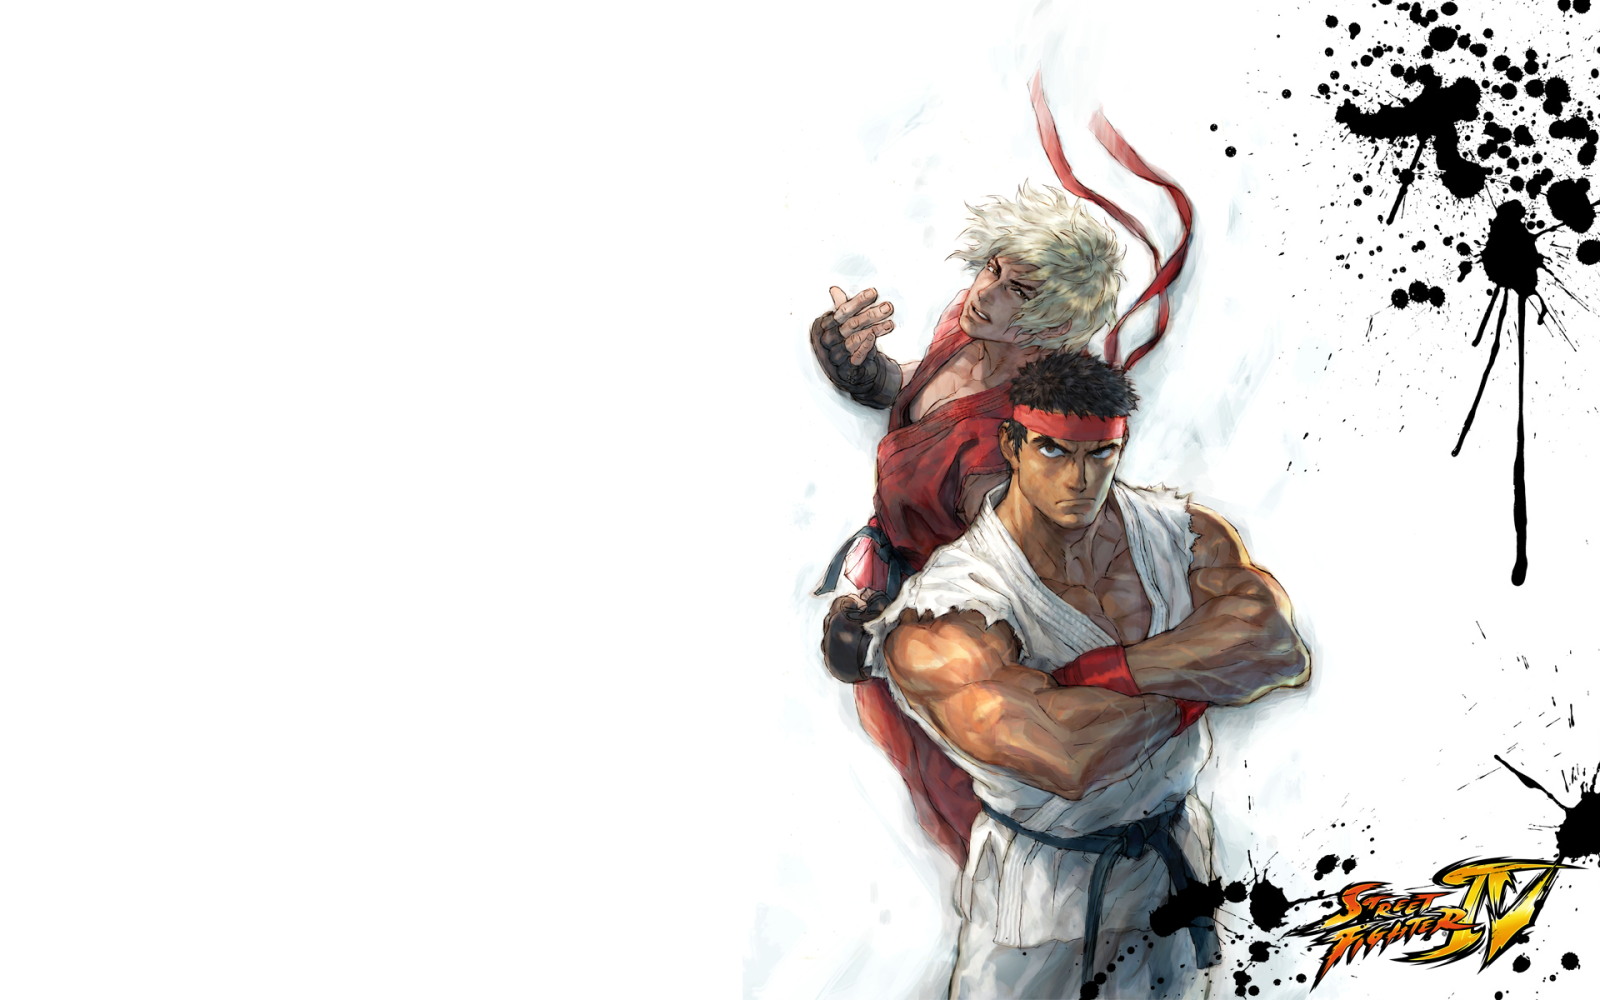 Wallpapers Street Fighter Png Iv Hd 1600x1000 #street